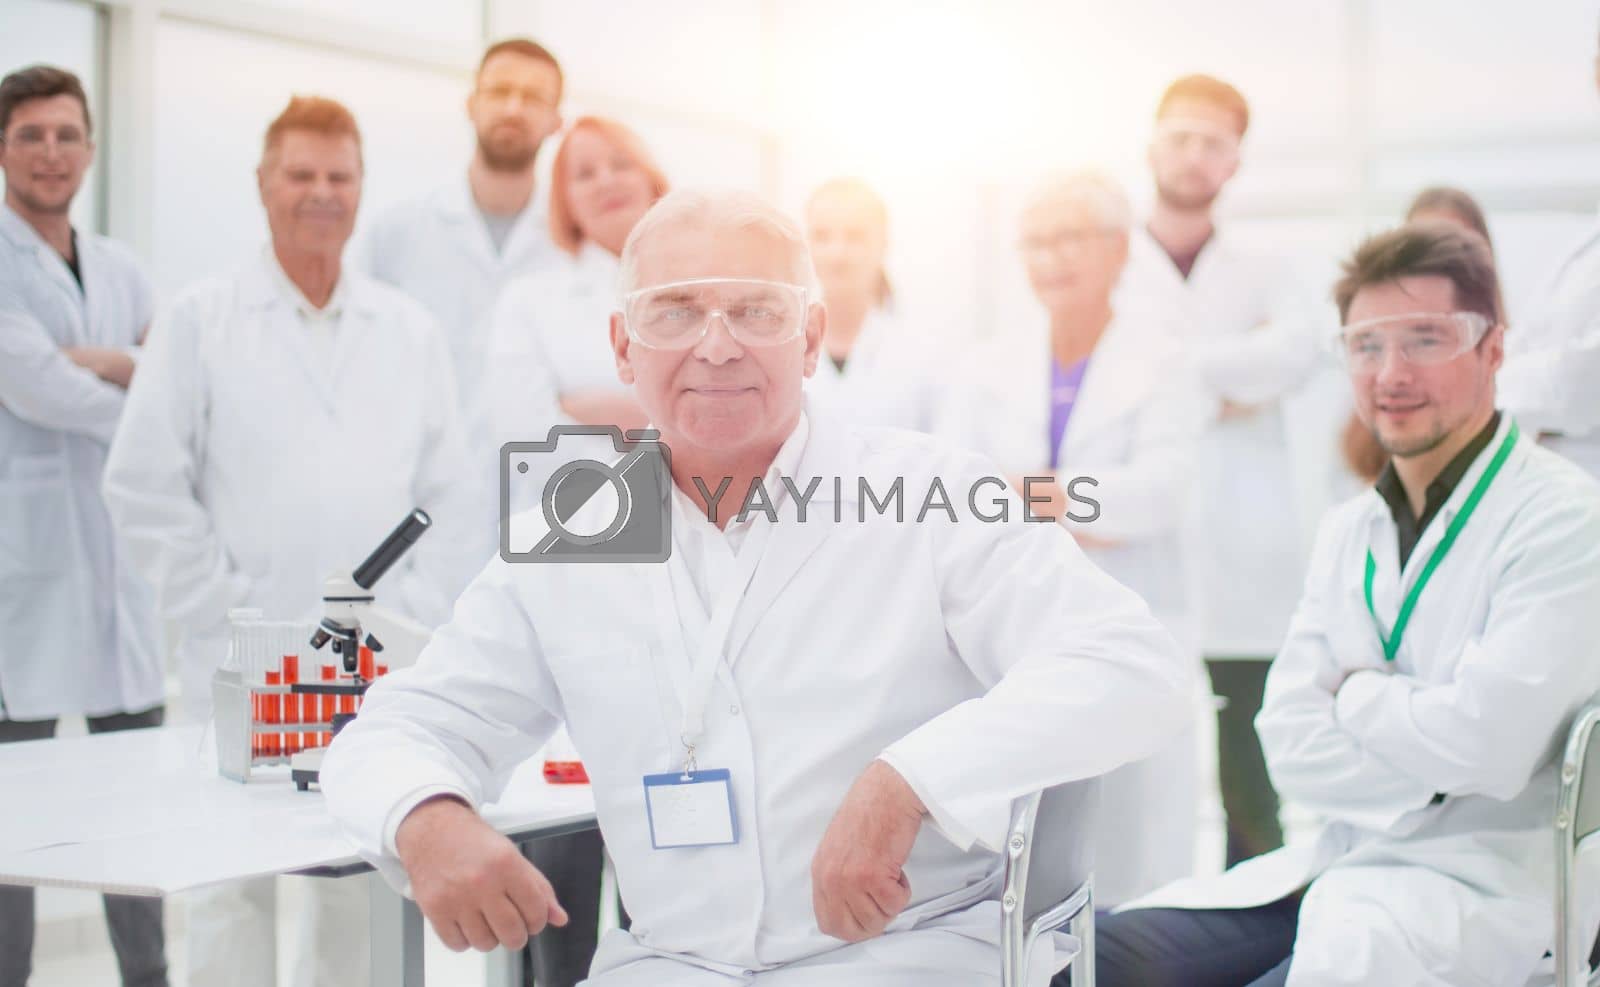 Royalty free image of tight-knit group of scientific laboratories in the workplace. by asdf